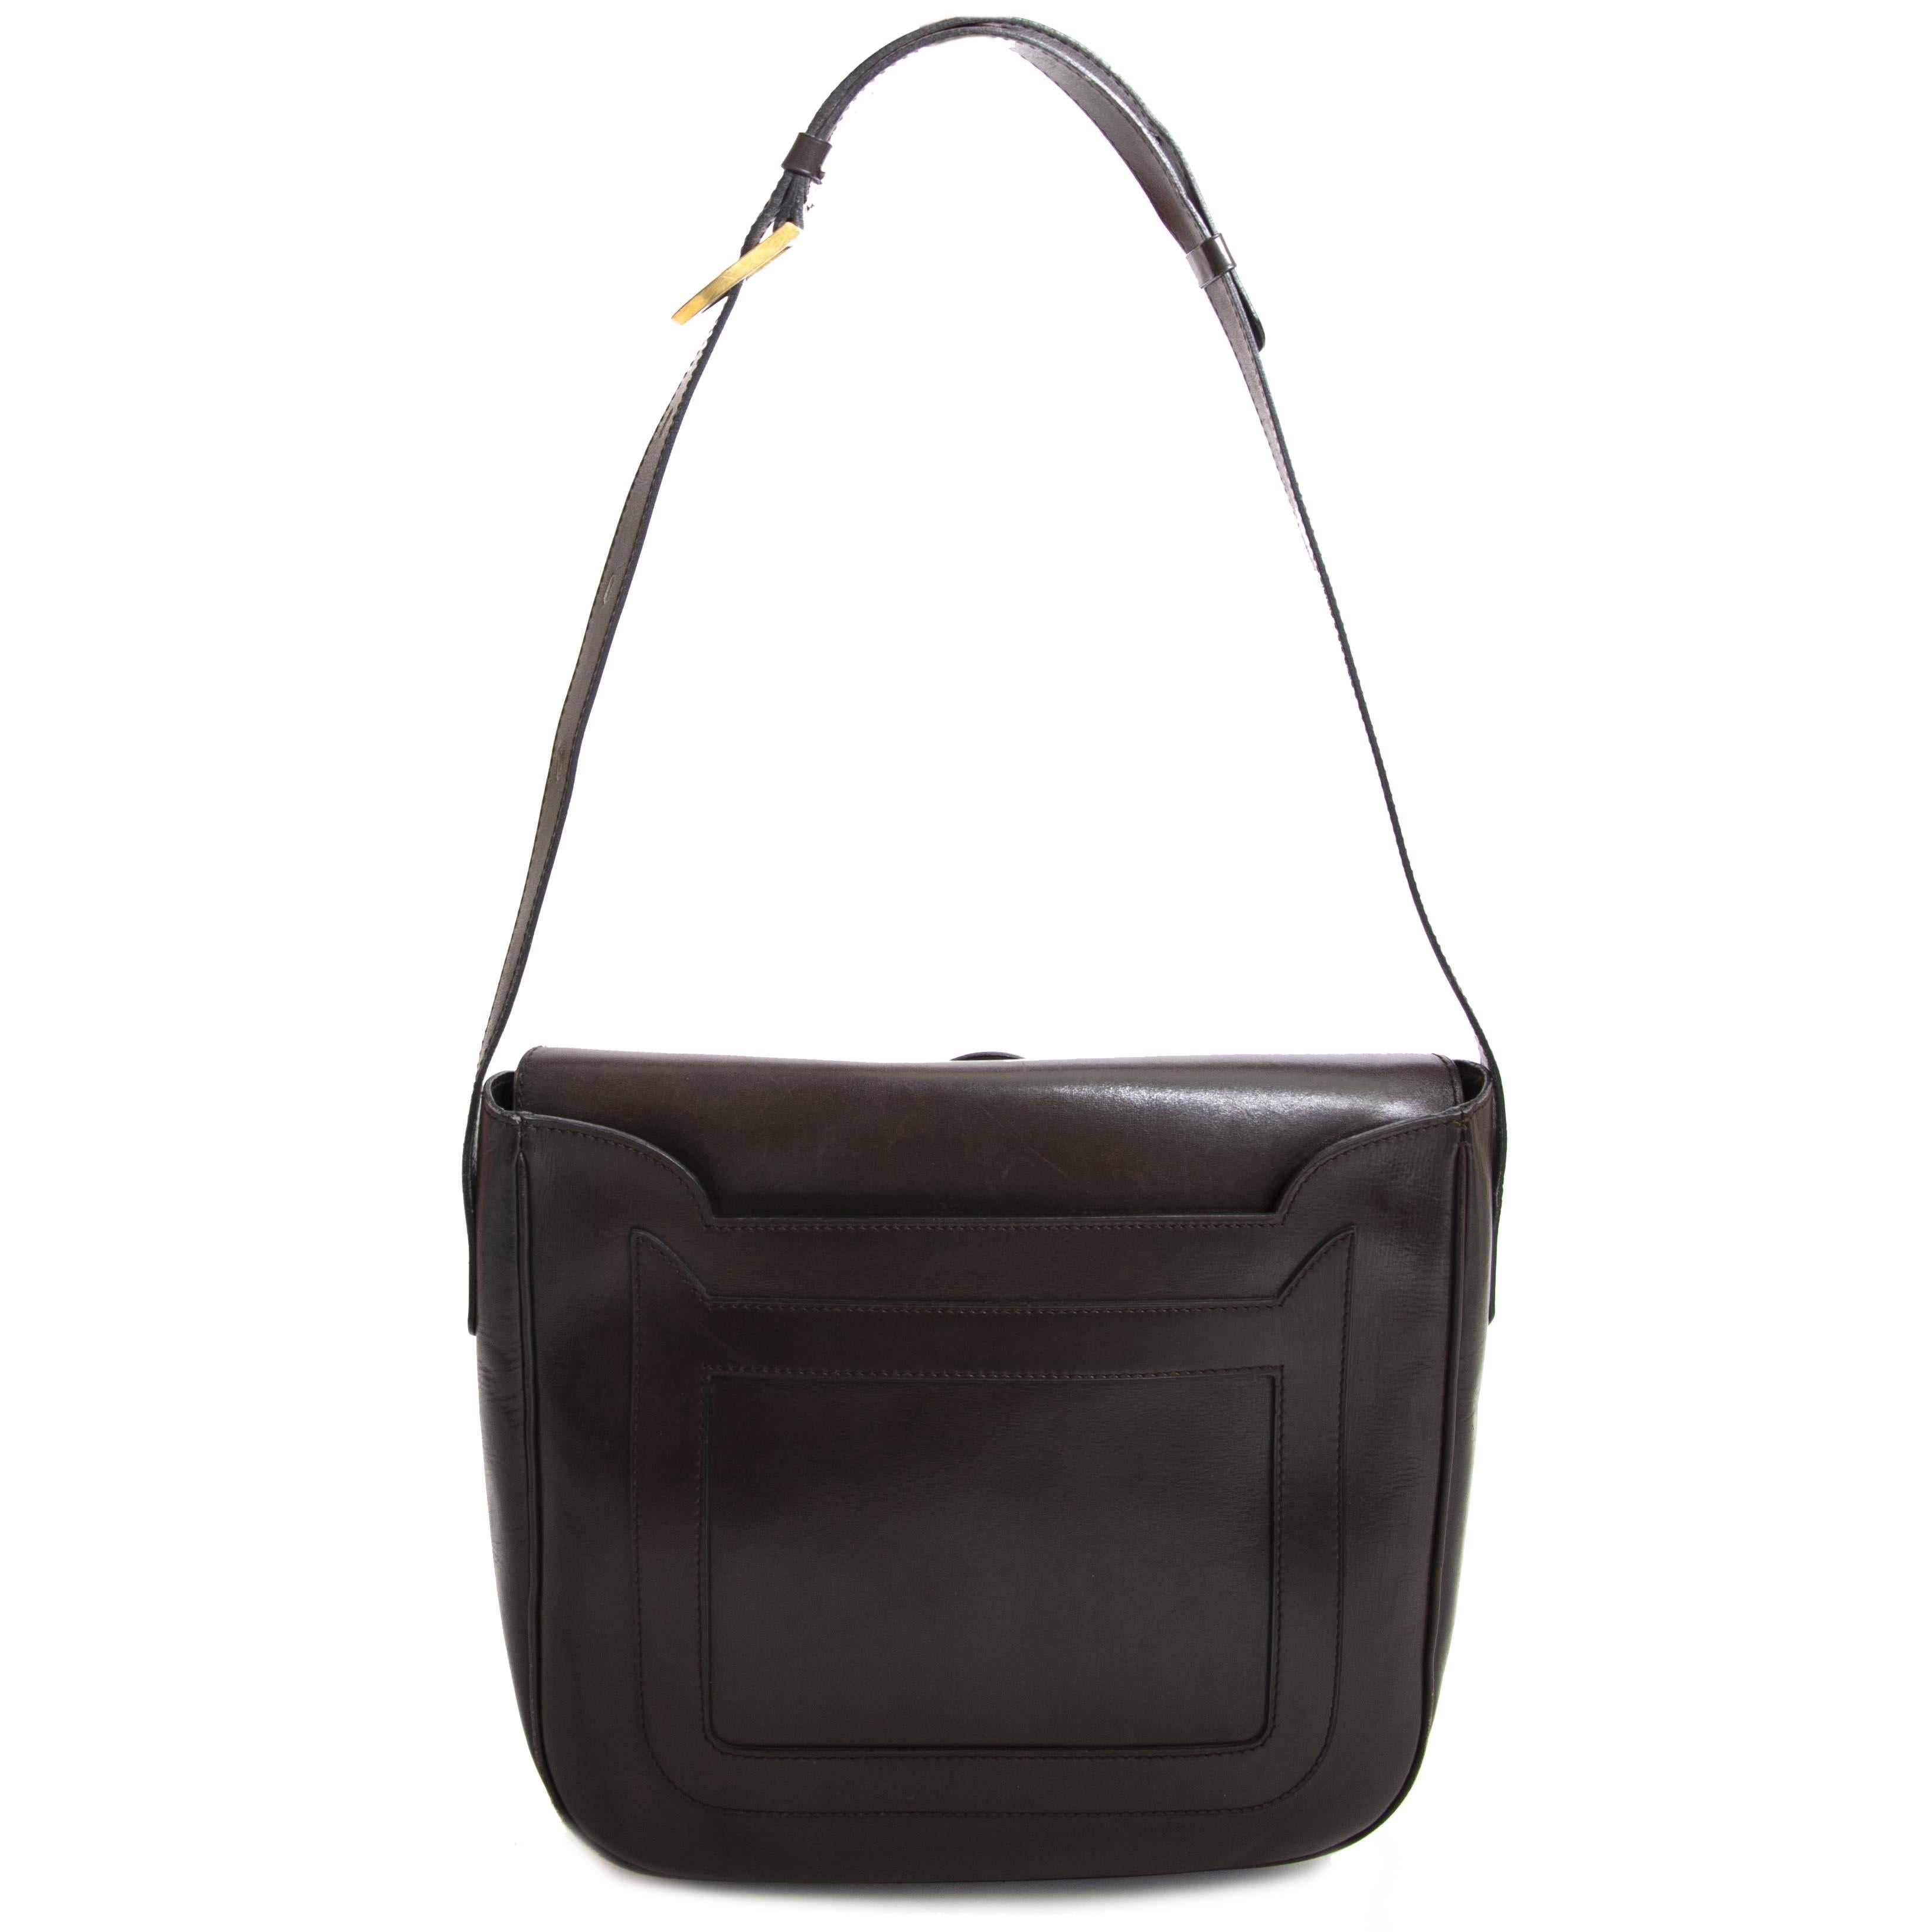 Good condition

Delvaux Brown Shoulder Bag

This dark chocolate bag is a simple beauty.

With multiple pockets and enough room for all your daily essentials, this shoulder bag is your best friend.